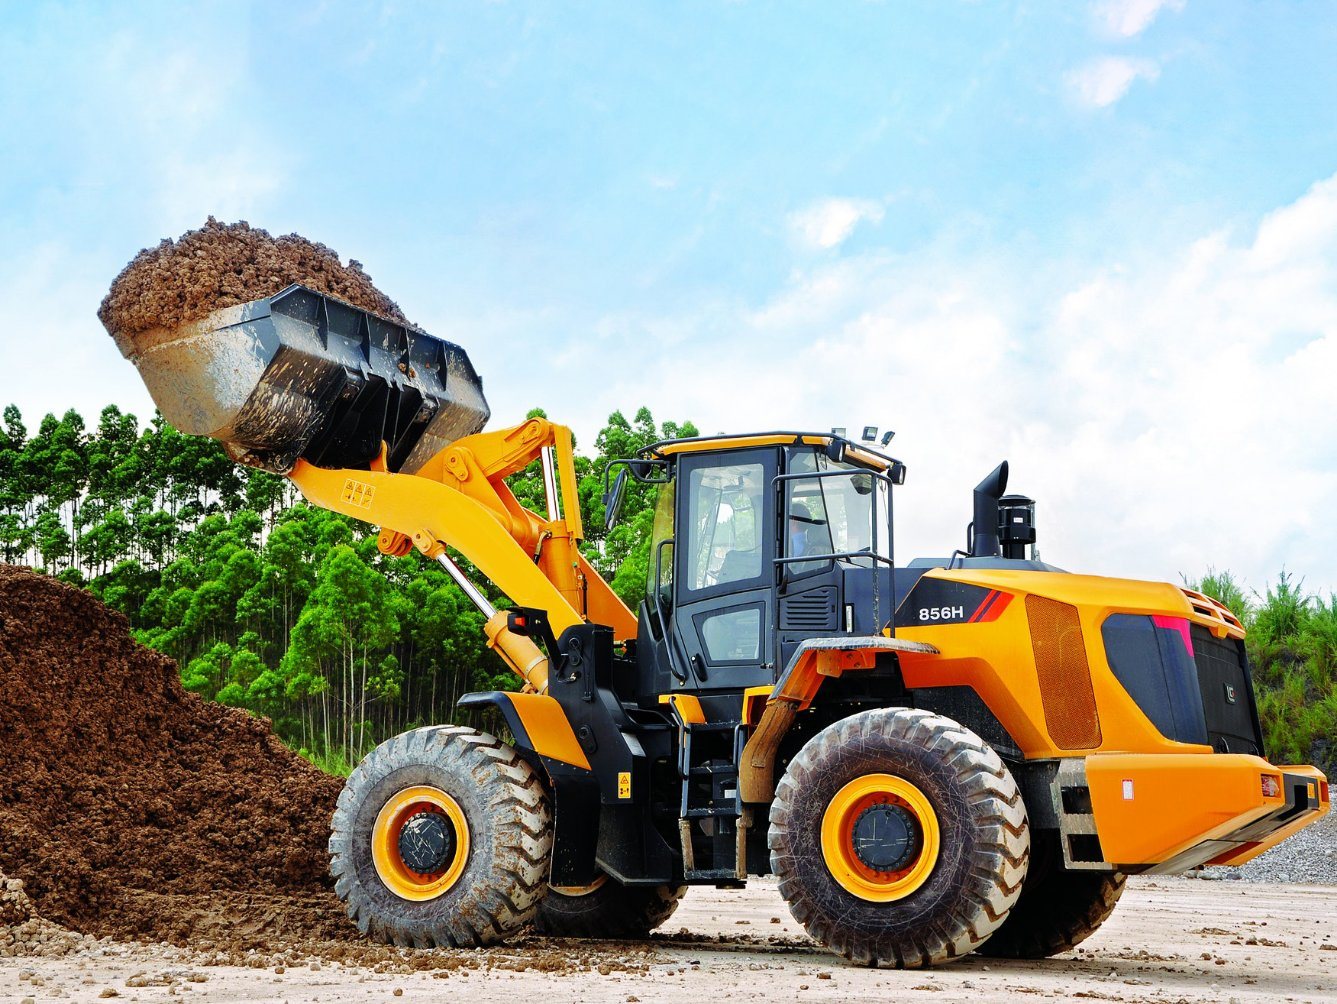 New Wheel Loader Cheap 5 Ton Wheel Loader Clg856h with High Quality